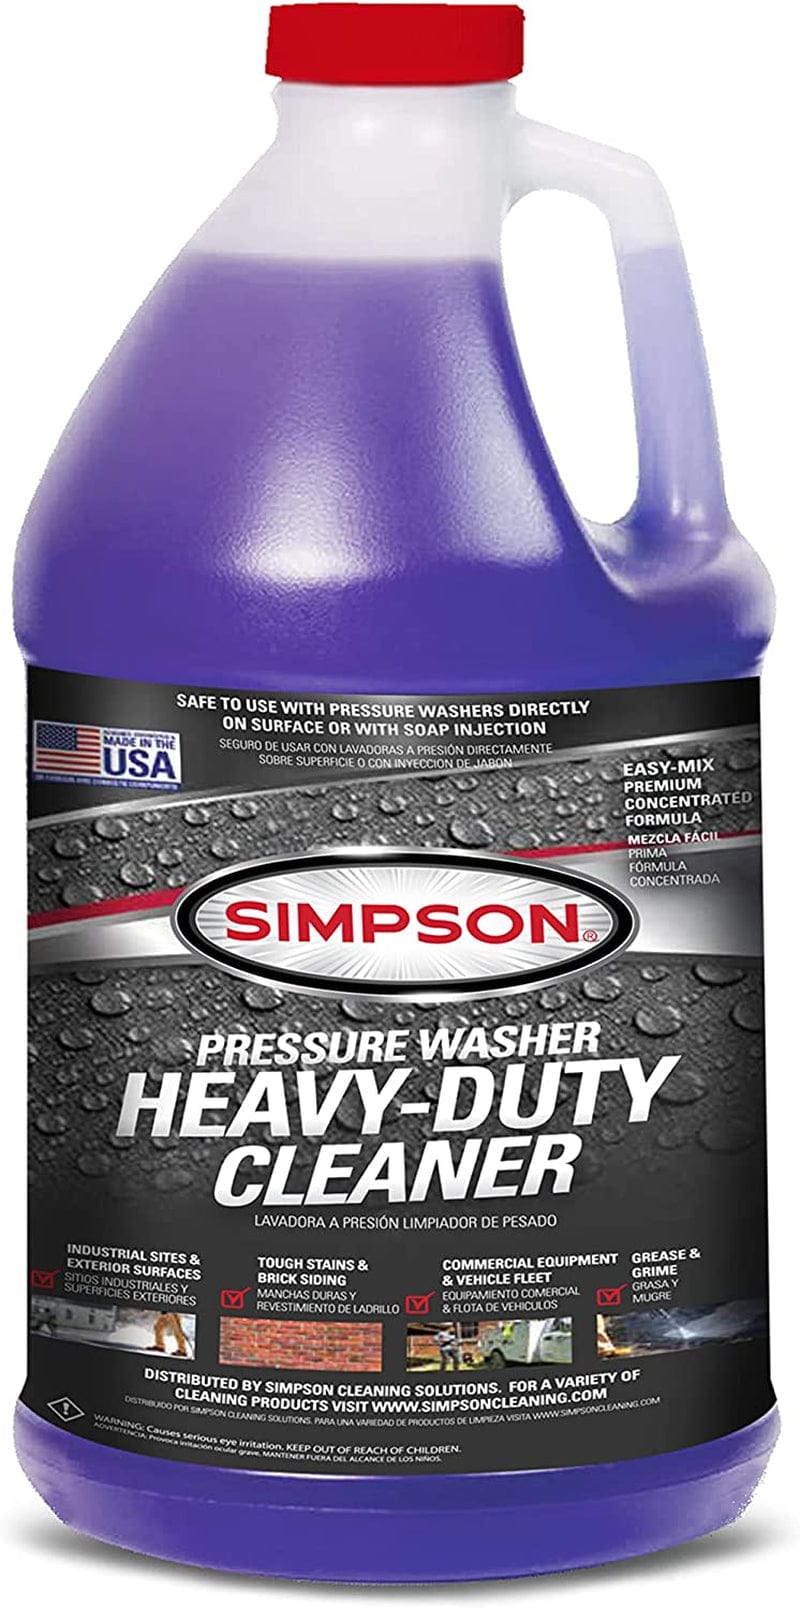 SIMPSON Cleaning 88282 Heavy Duty Cleaner, Concentrated Soap Solution for Pressure Washers and Spray Bottles, Use on Concrete, Vinyl Siding, Appliances, Windows, Cars, Fences, Decks, Purple, 1 Gallon Home & Garden > Household Supplies > Household Cleaning Supplies Simpson Heavy Duty  